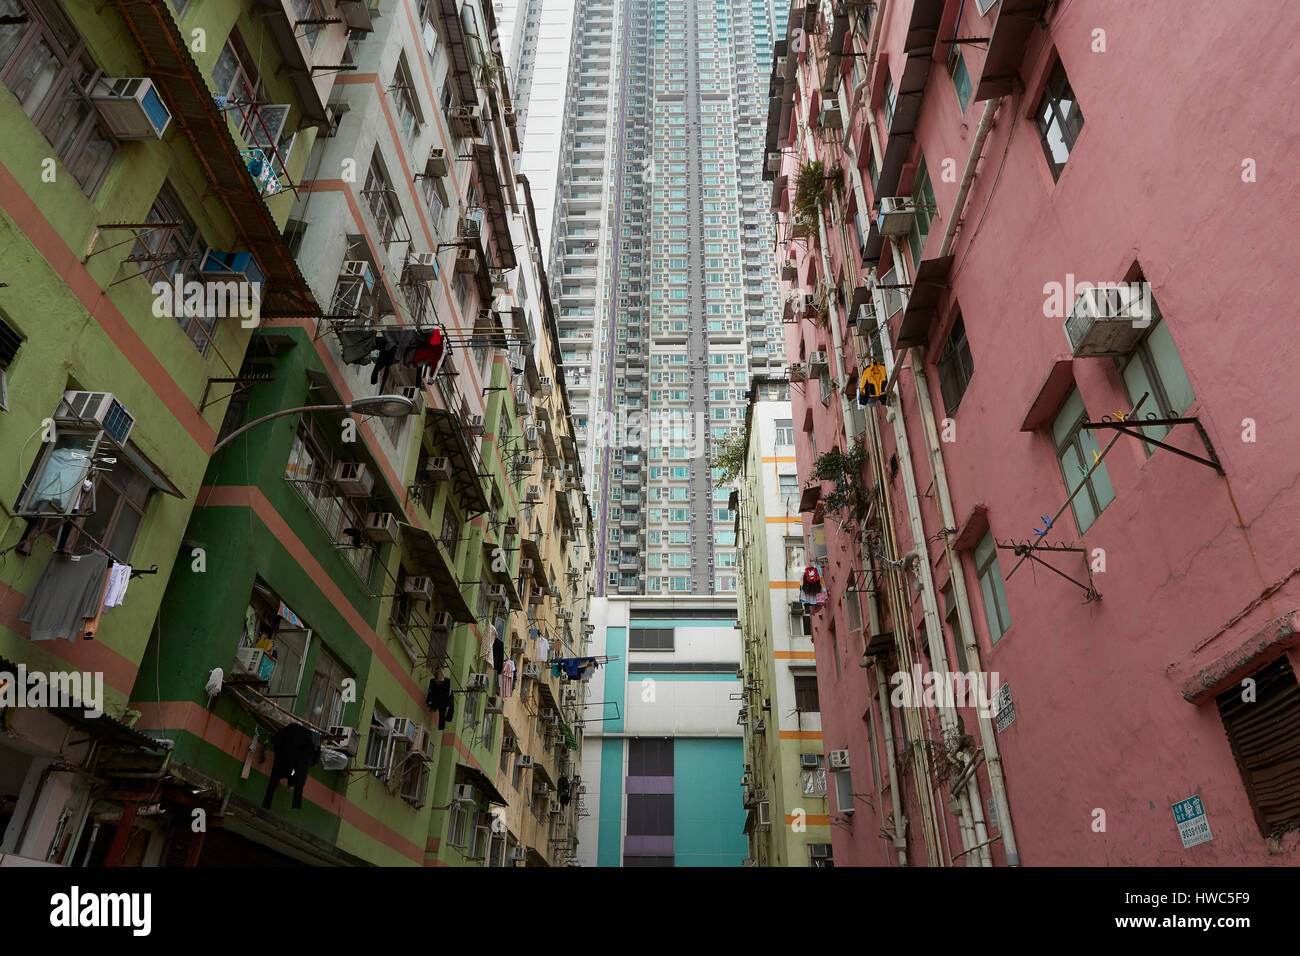 Contrasting High Rise And Low Rise Buildings In Kowloon City, Hong Kong. Stock Photo